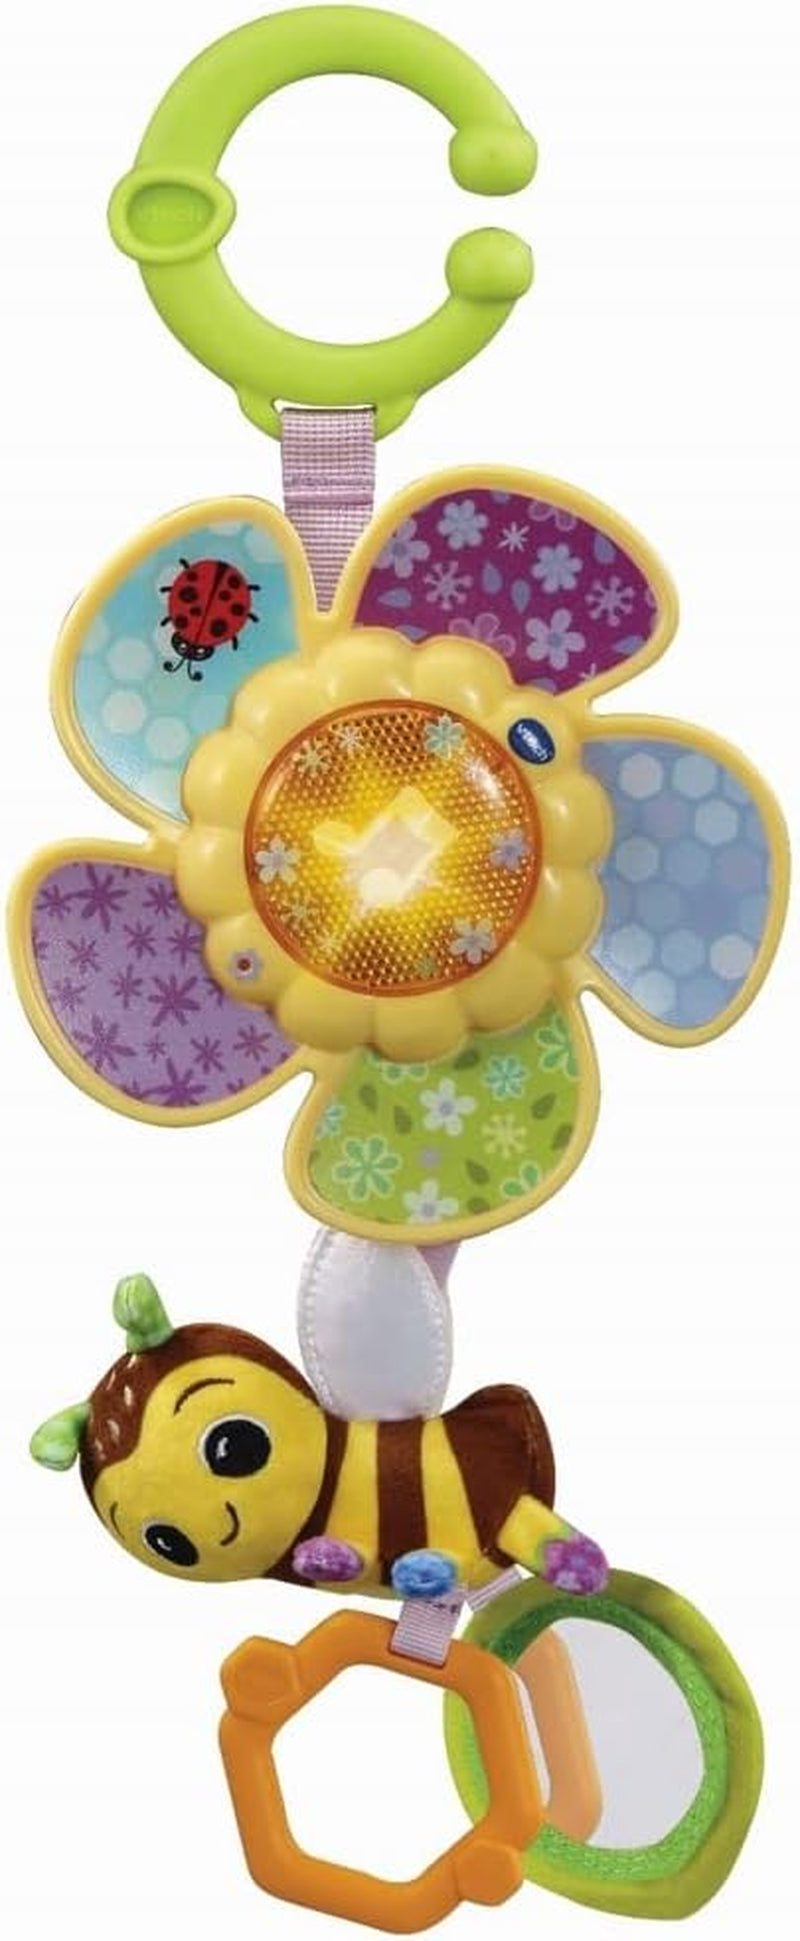 Vtech Baby Tug & Spin Busy Bee Interactive Toy for On-The-Go Play